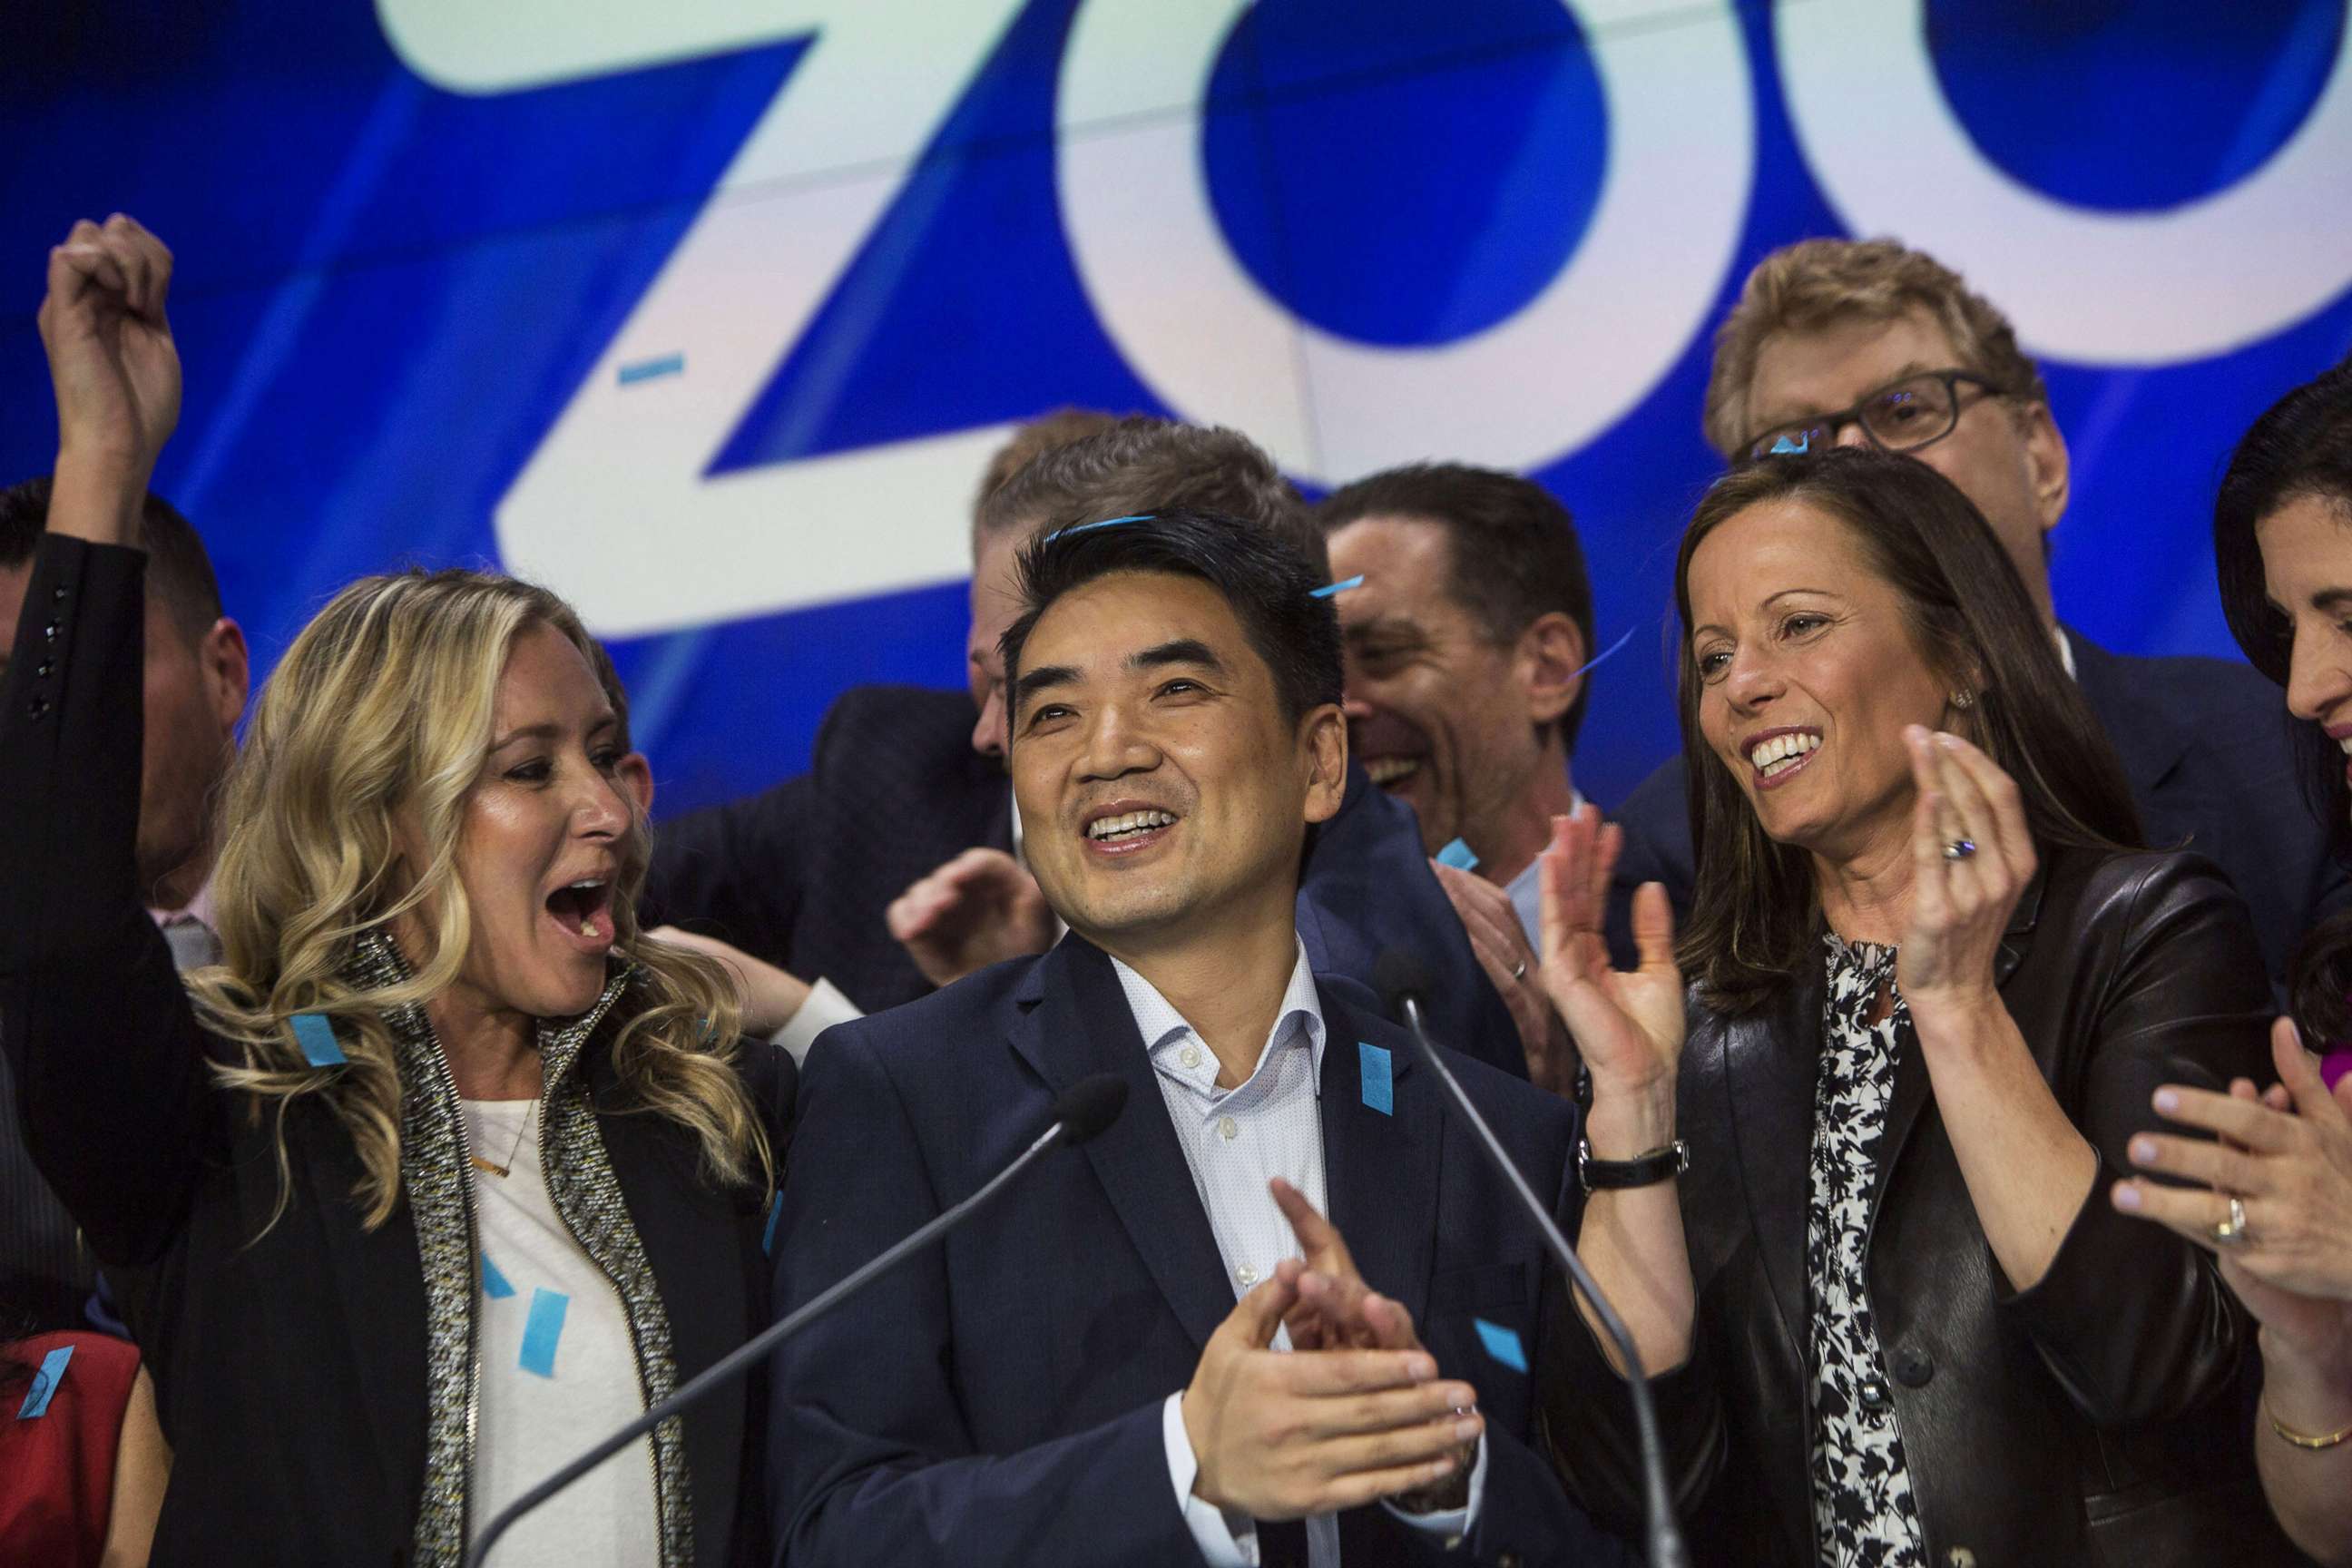 PHOTO: Eric Yuan, founder and CEO of Zoom Video Communications, reacts during the company's initial public offering (IPO) at the Nasdaq MarketSite in New York, April 18, 2019.  